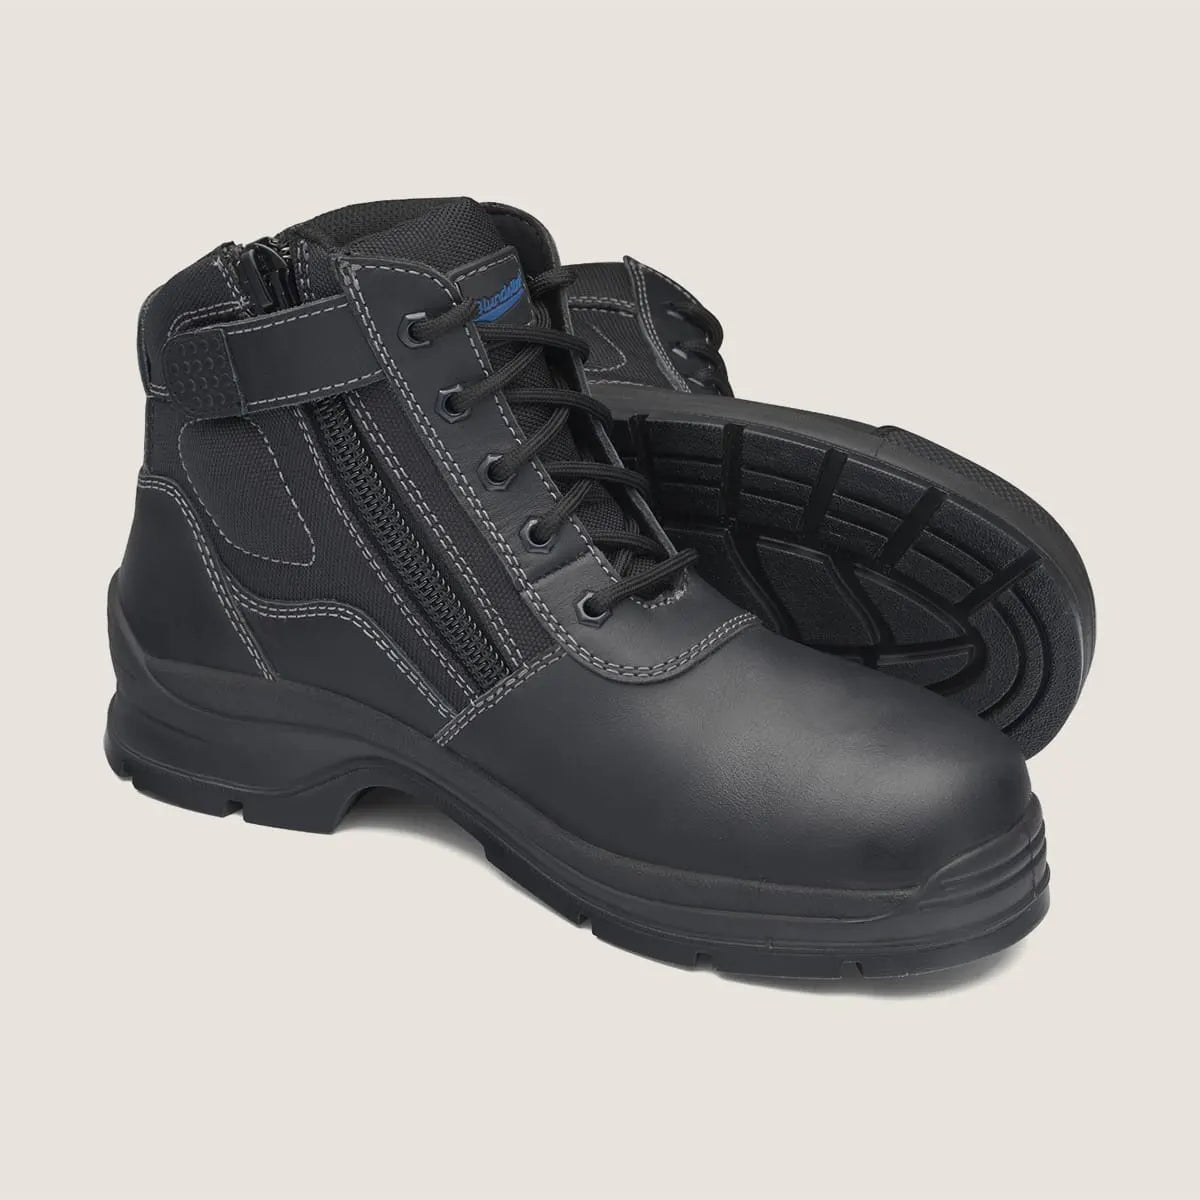 Blundstone 419 Non Safety Lace Up Zip Side Boots in Black